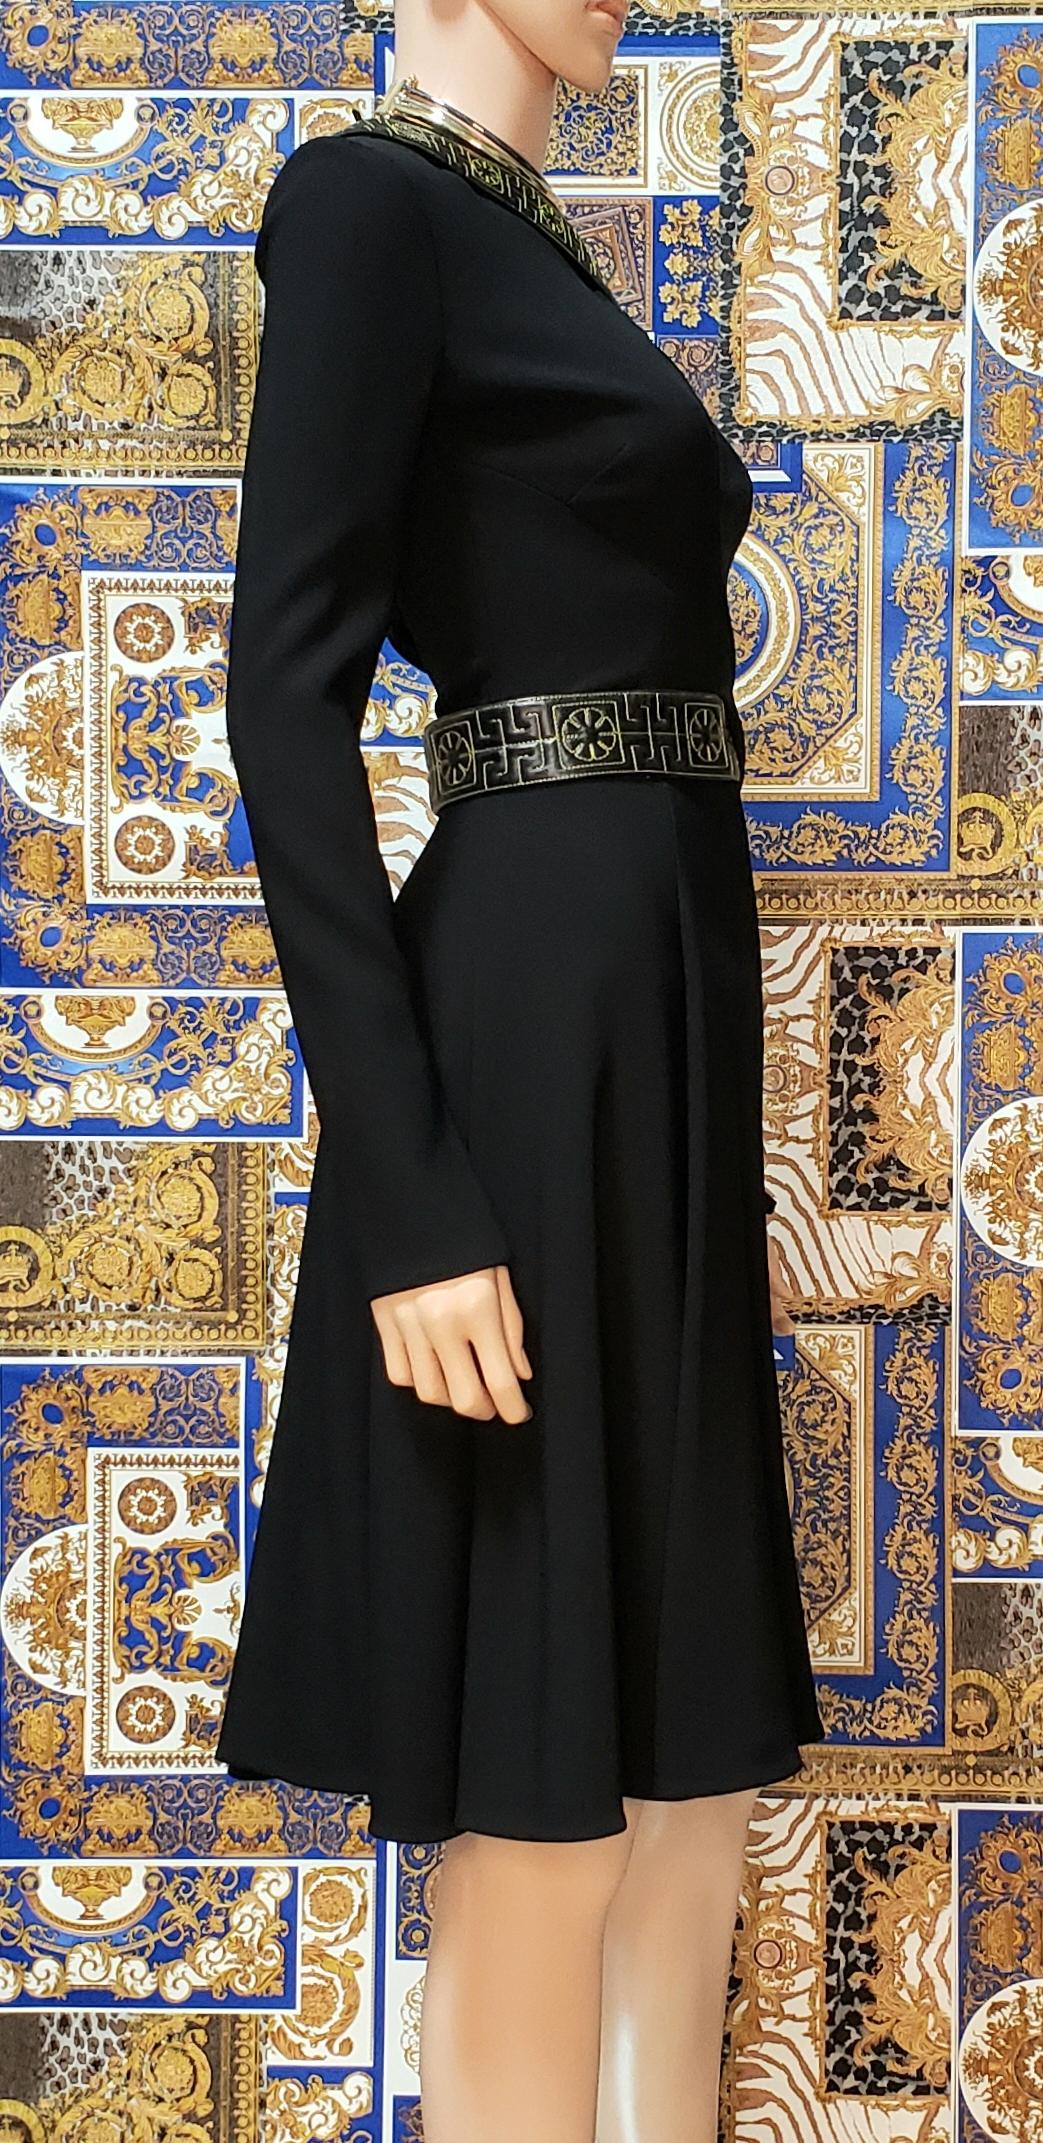 Women's F/W 2015 L#19 VERSACE BLACK DRESS with CUTOUTS and GOLD EMBROIDERY 38 - 2 For Sale